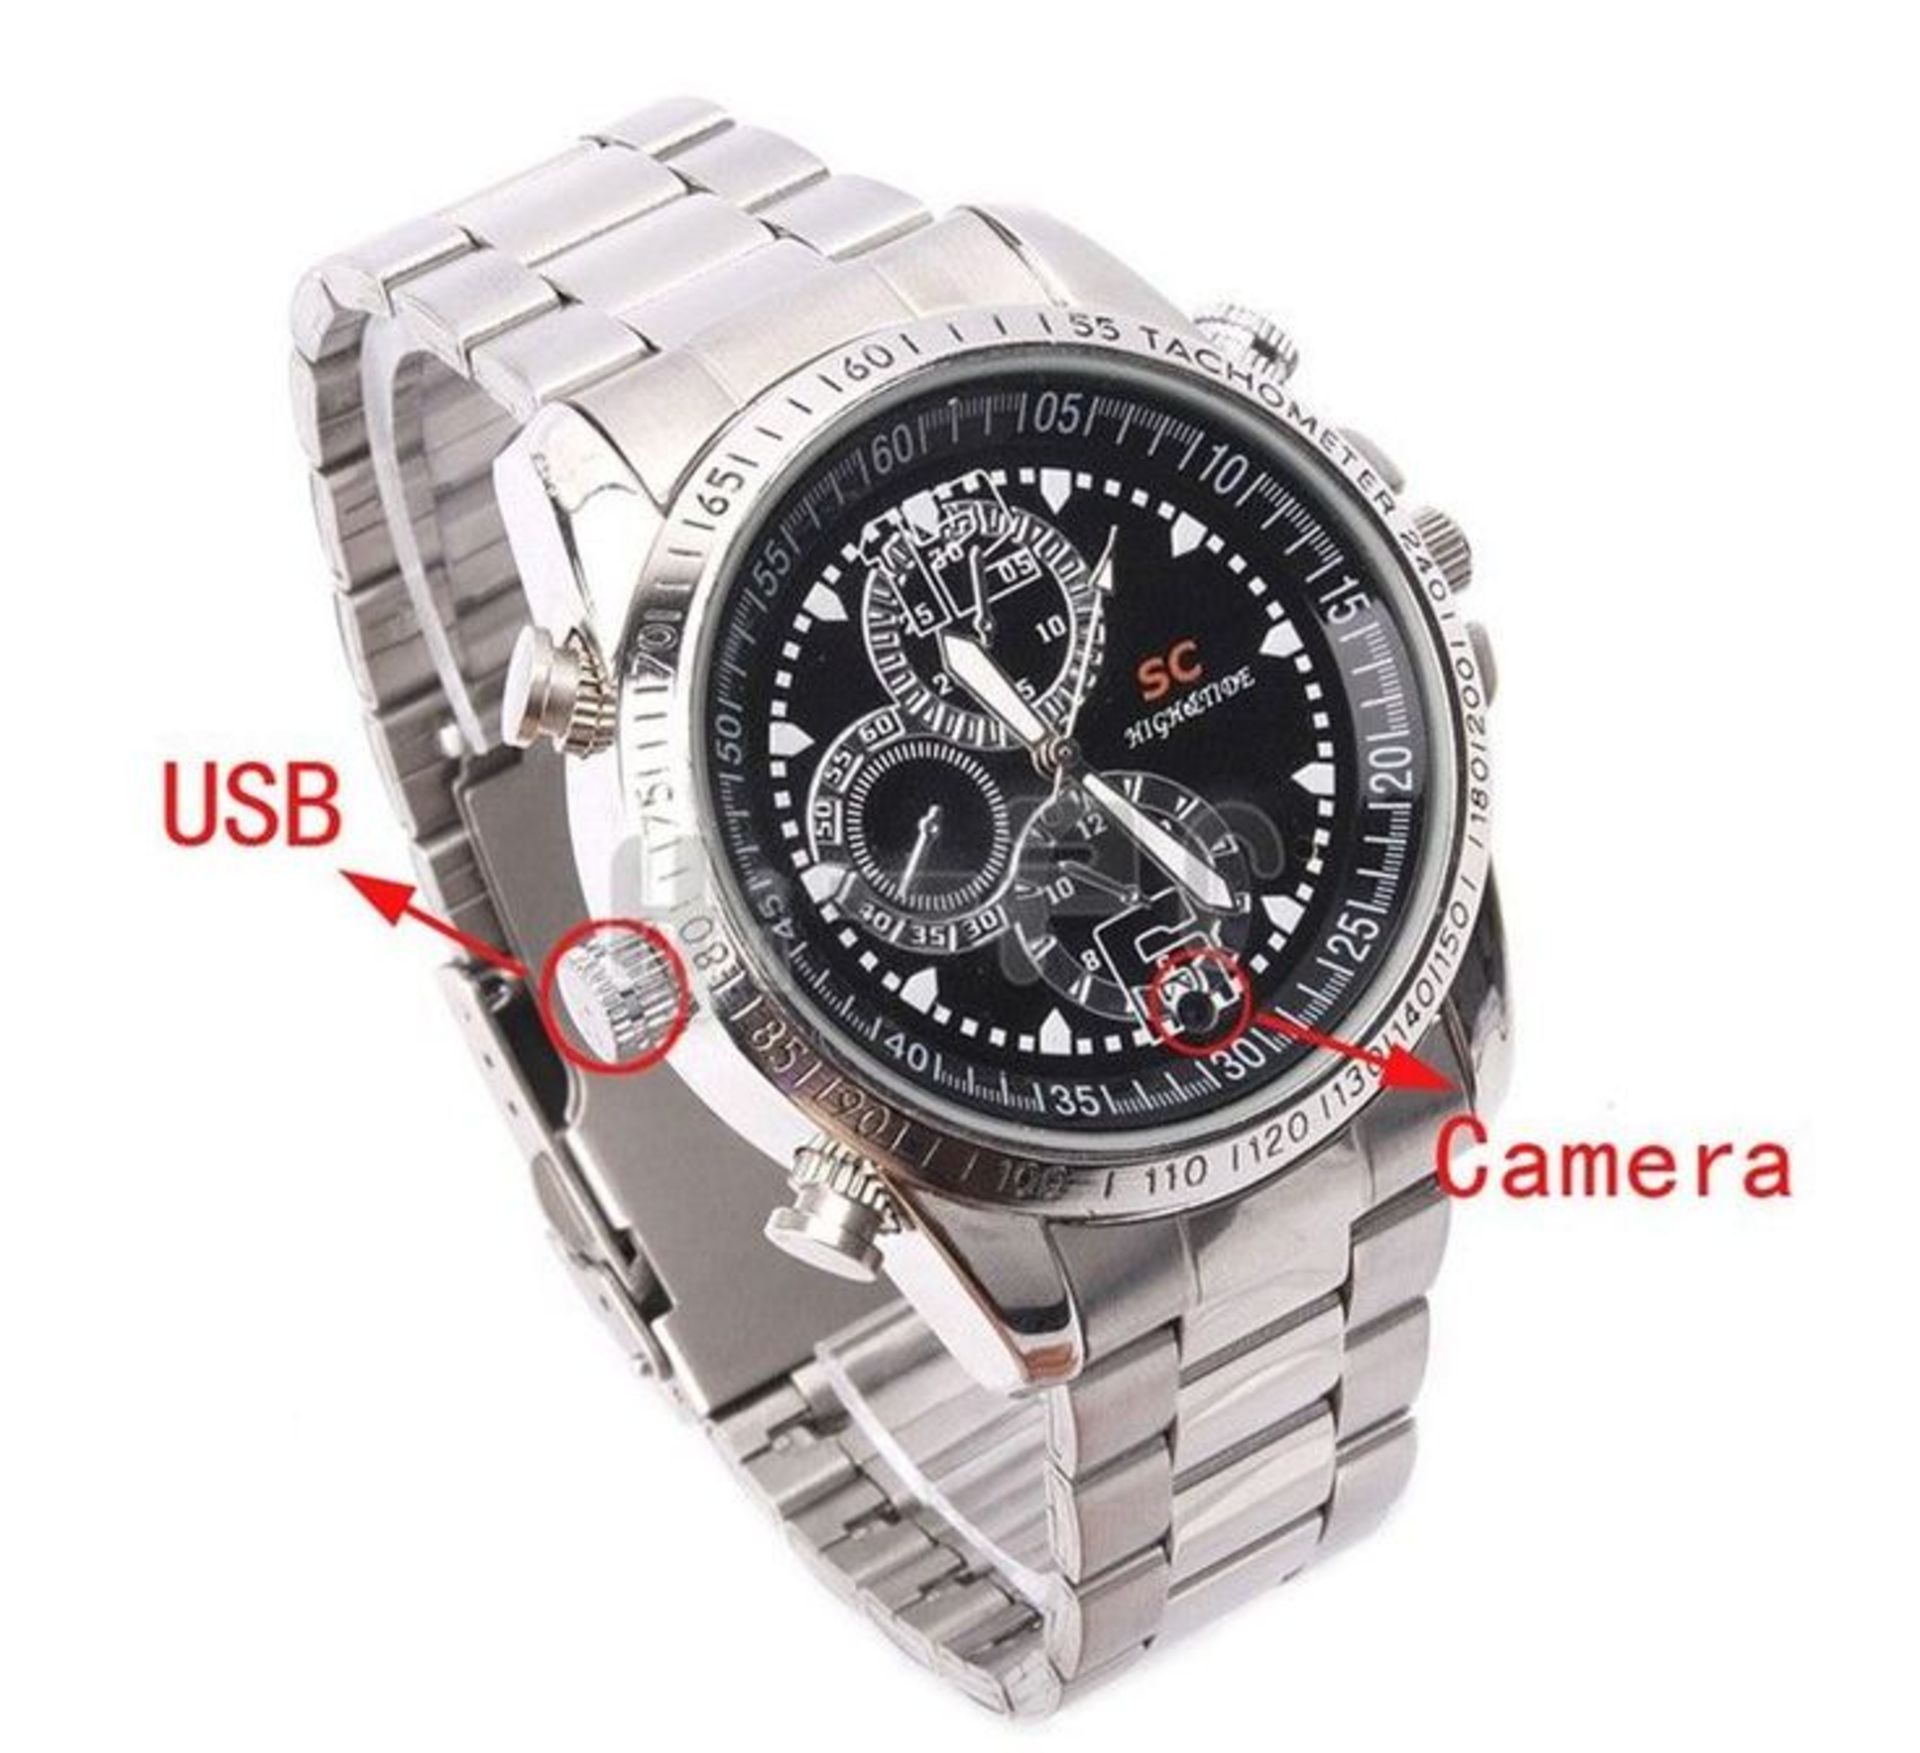 V Brand New Snoop Tech Security & Surveillance Stainless Steel Sports Strap 4gb Covert Watch